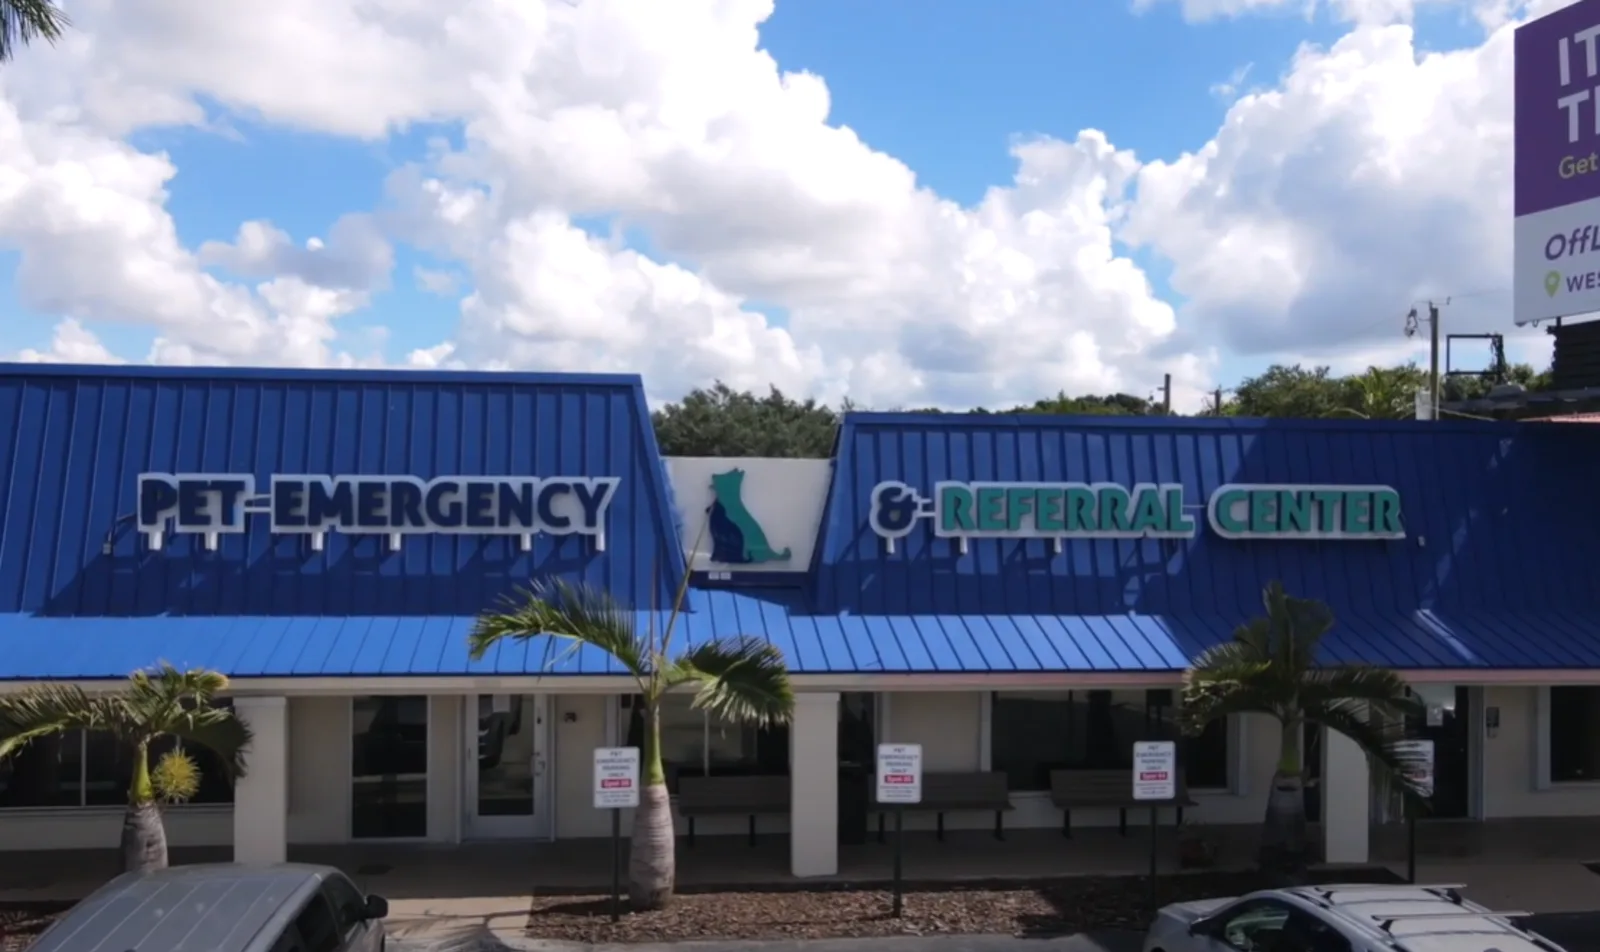 Join Our Team video image of the parking lot view of Pet Emergency & Referral Center